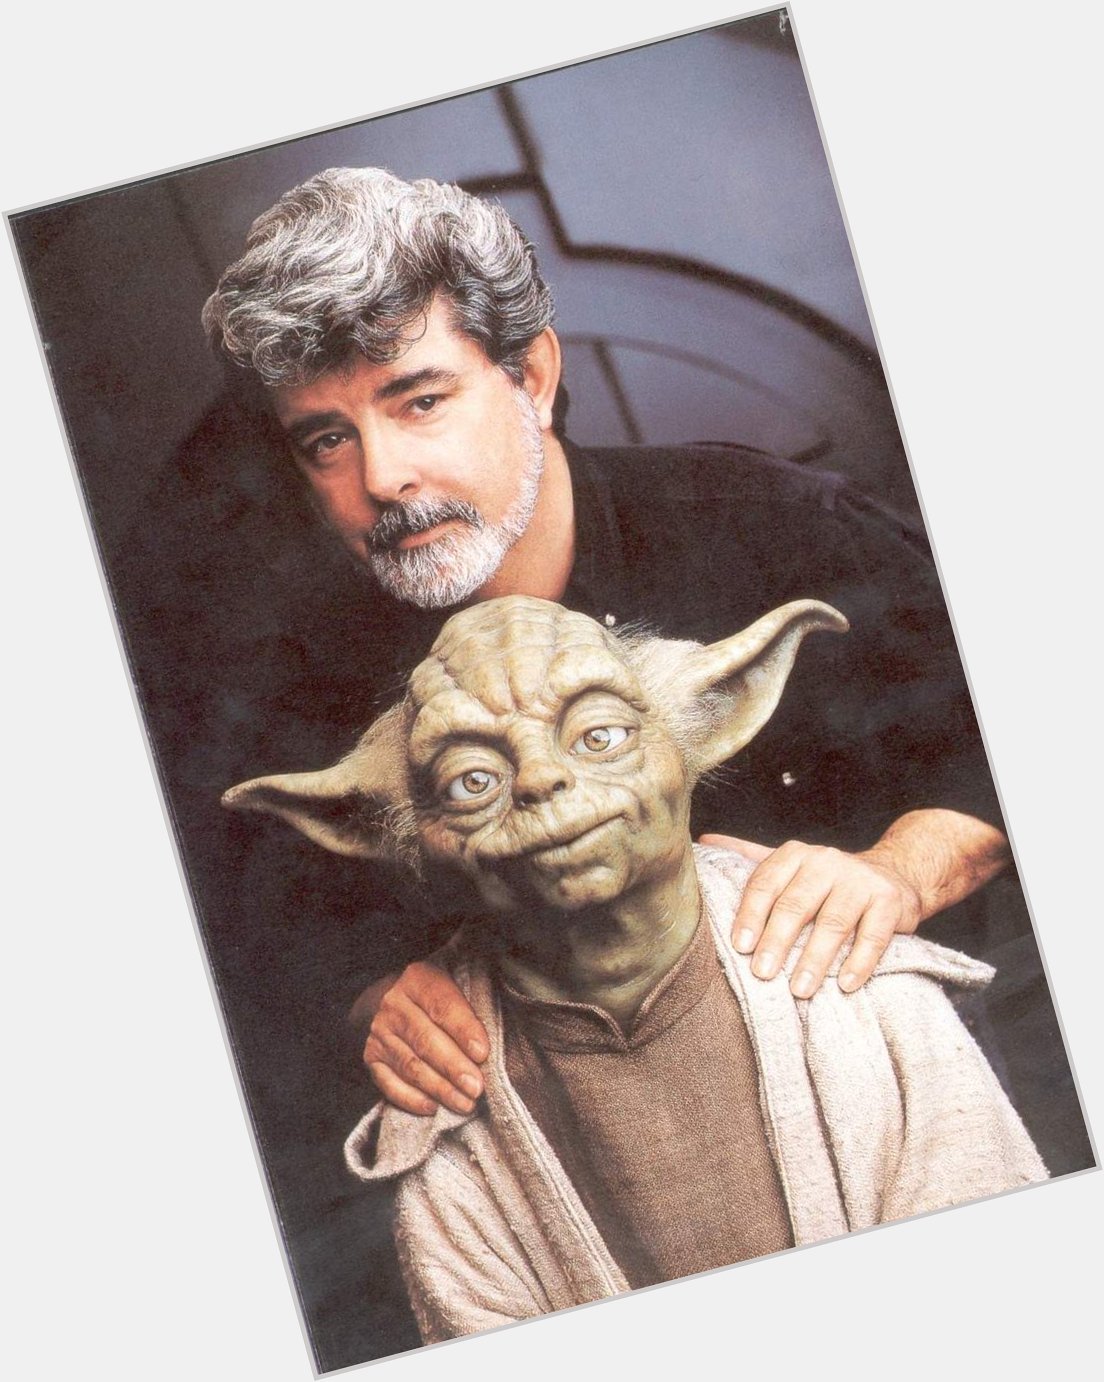 Happy 71st Birthday to George Lucas, creator of Star Wars and Indiana Jones! 